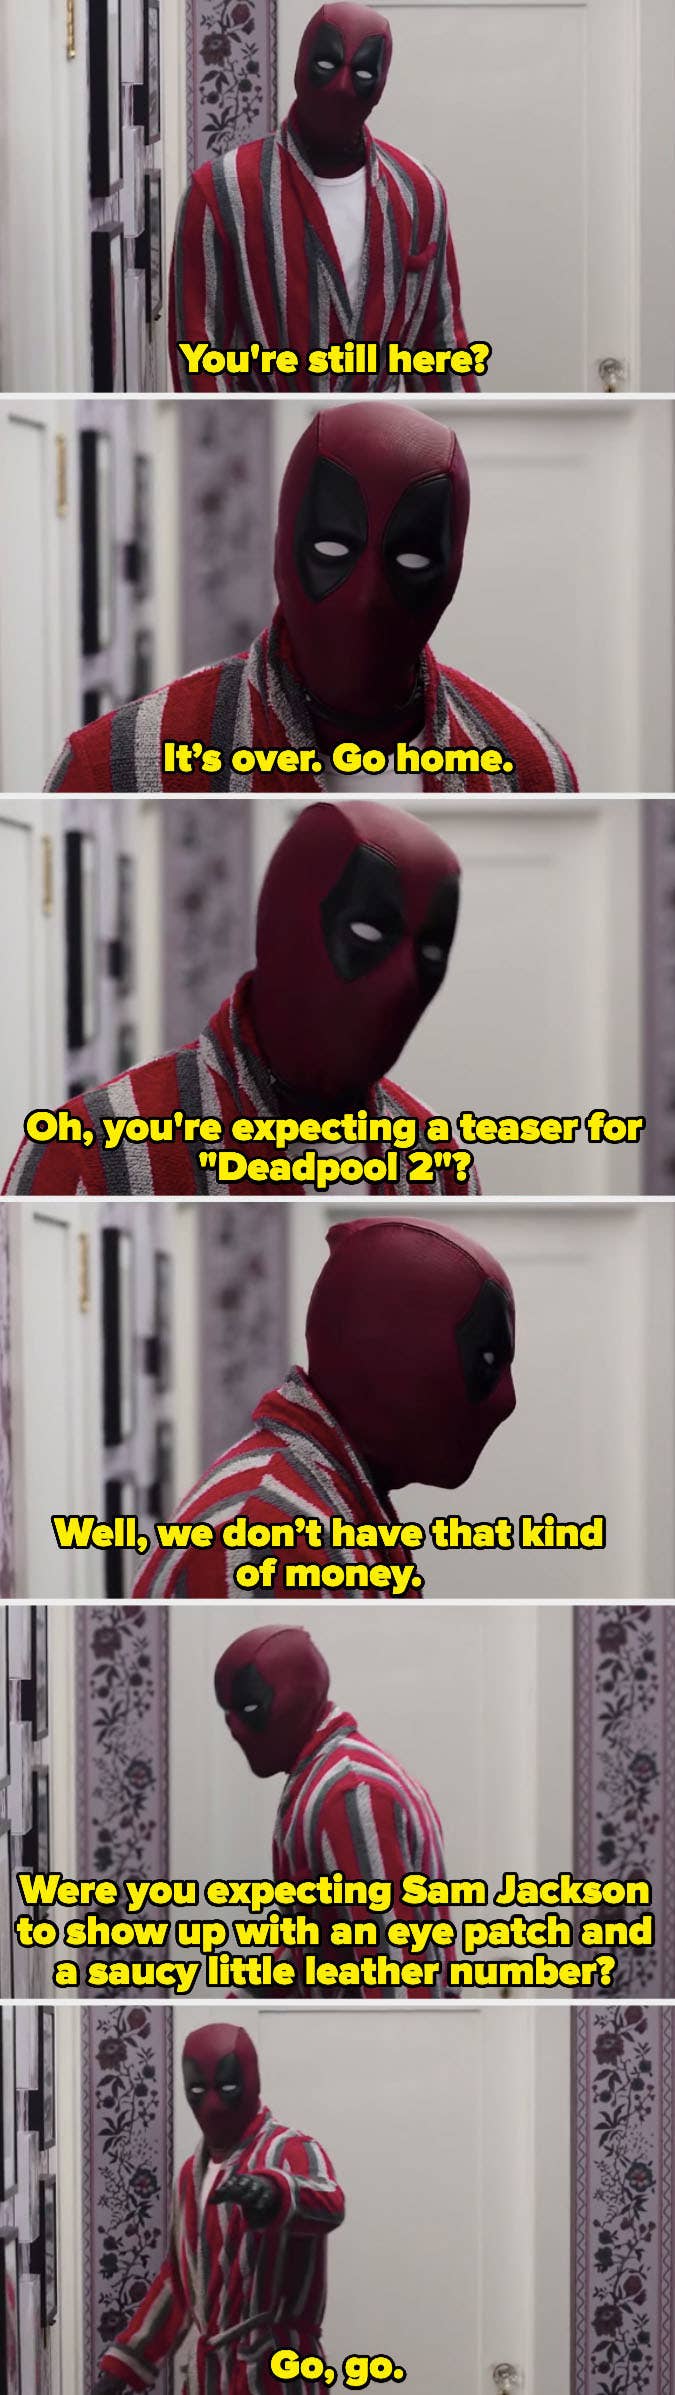 Deadpool quotes Ferris Bueller and then asks the audience if they were expecting to see Sam Jackson in a saucy leather number